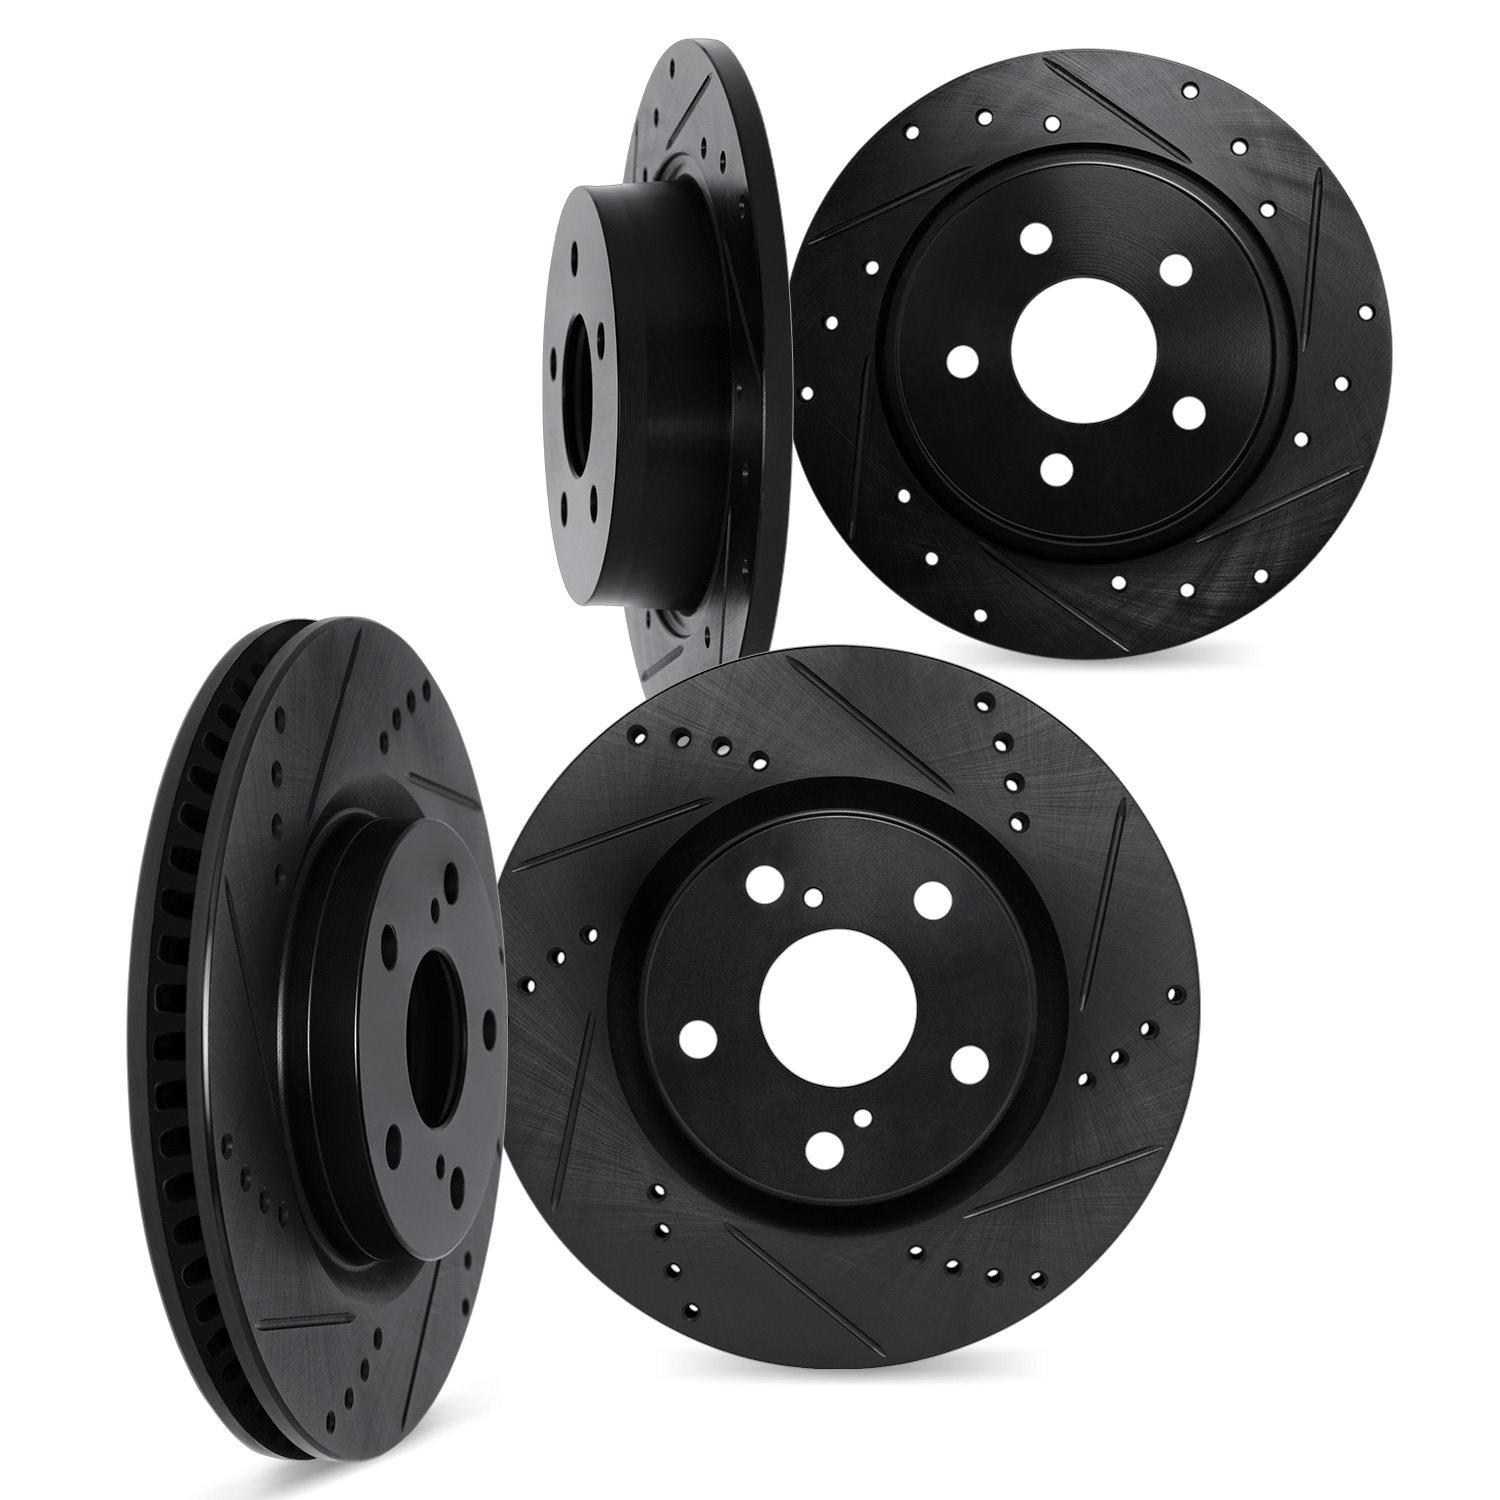 8004-76010 Drilled/Slotted Brake Rotors [Black], 2003-2006 Lexus/Toyota/Scion, Position: Front and Rear